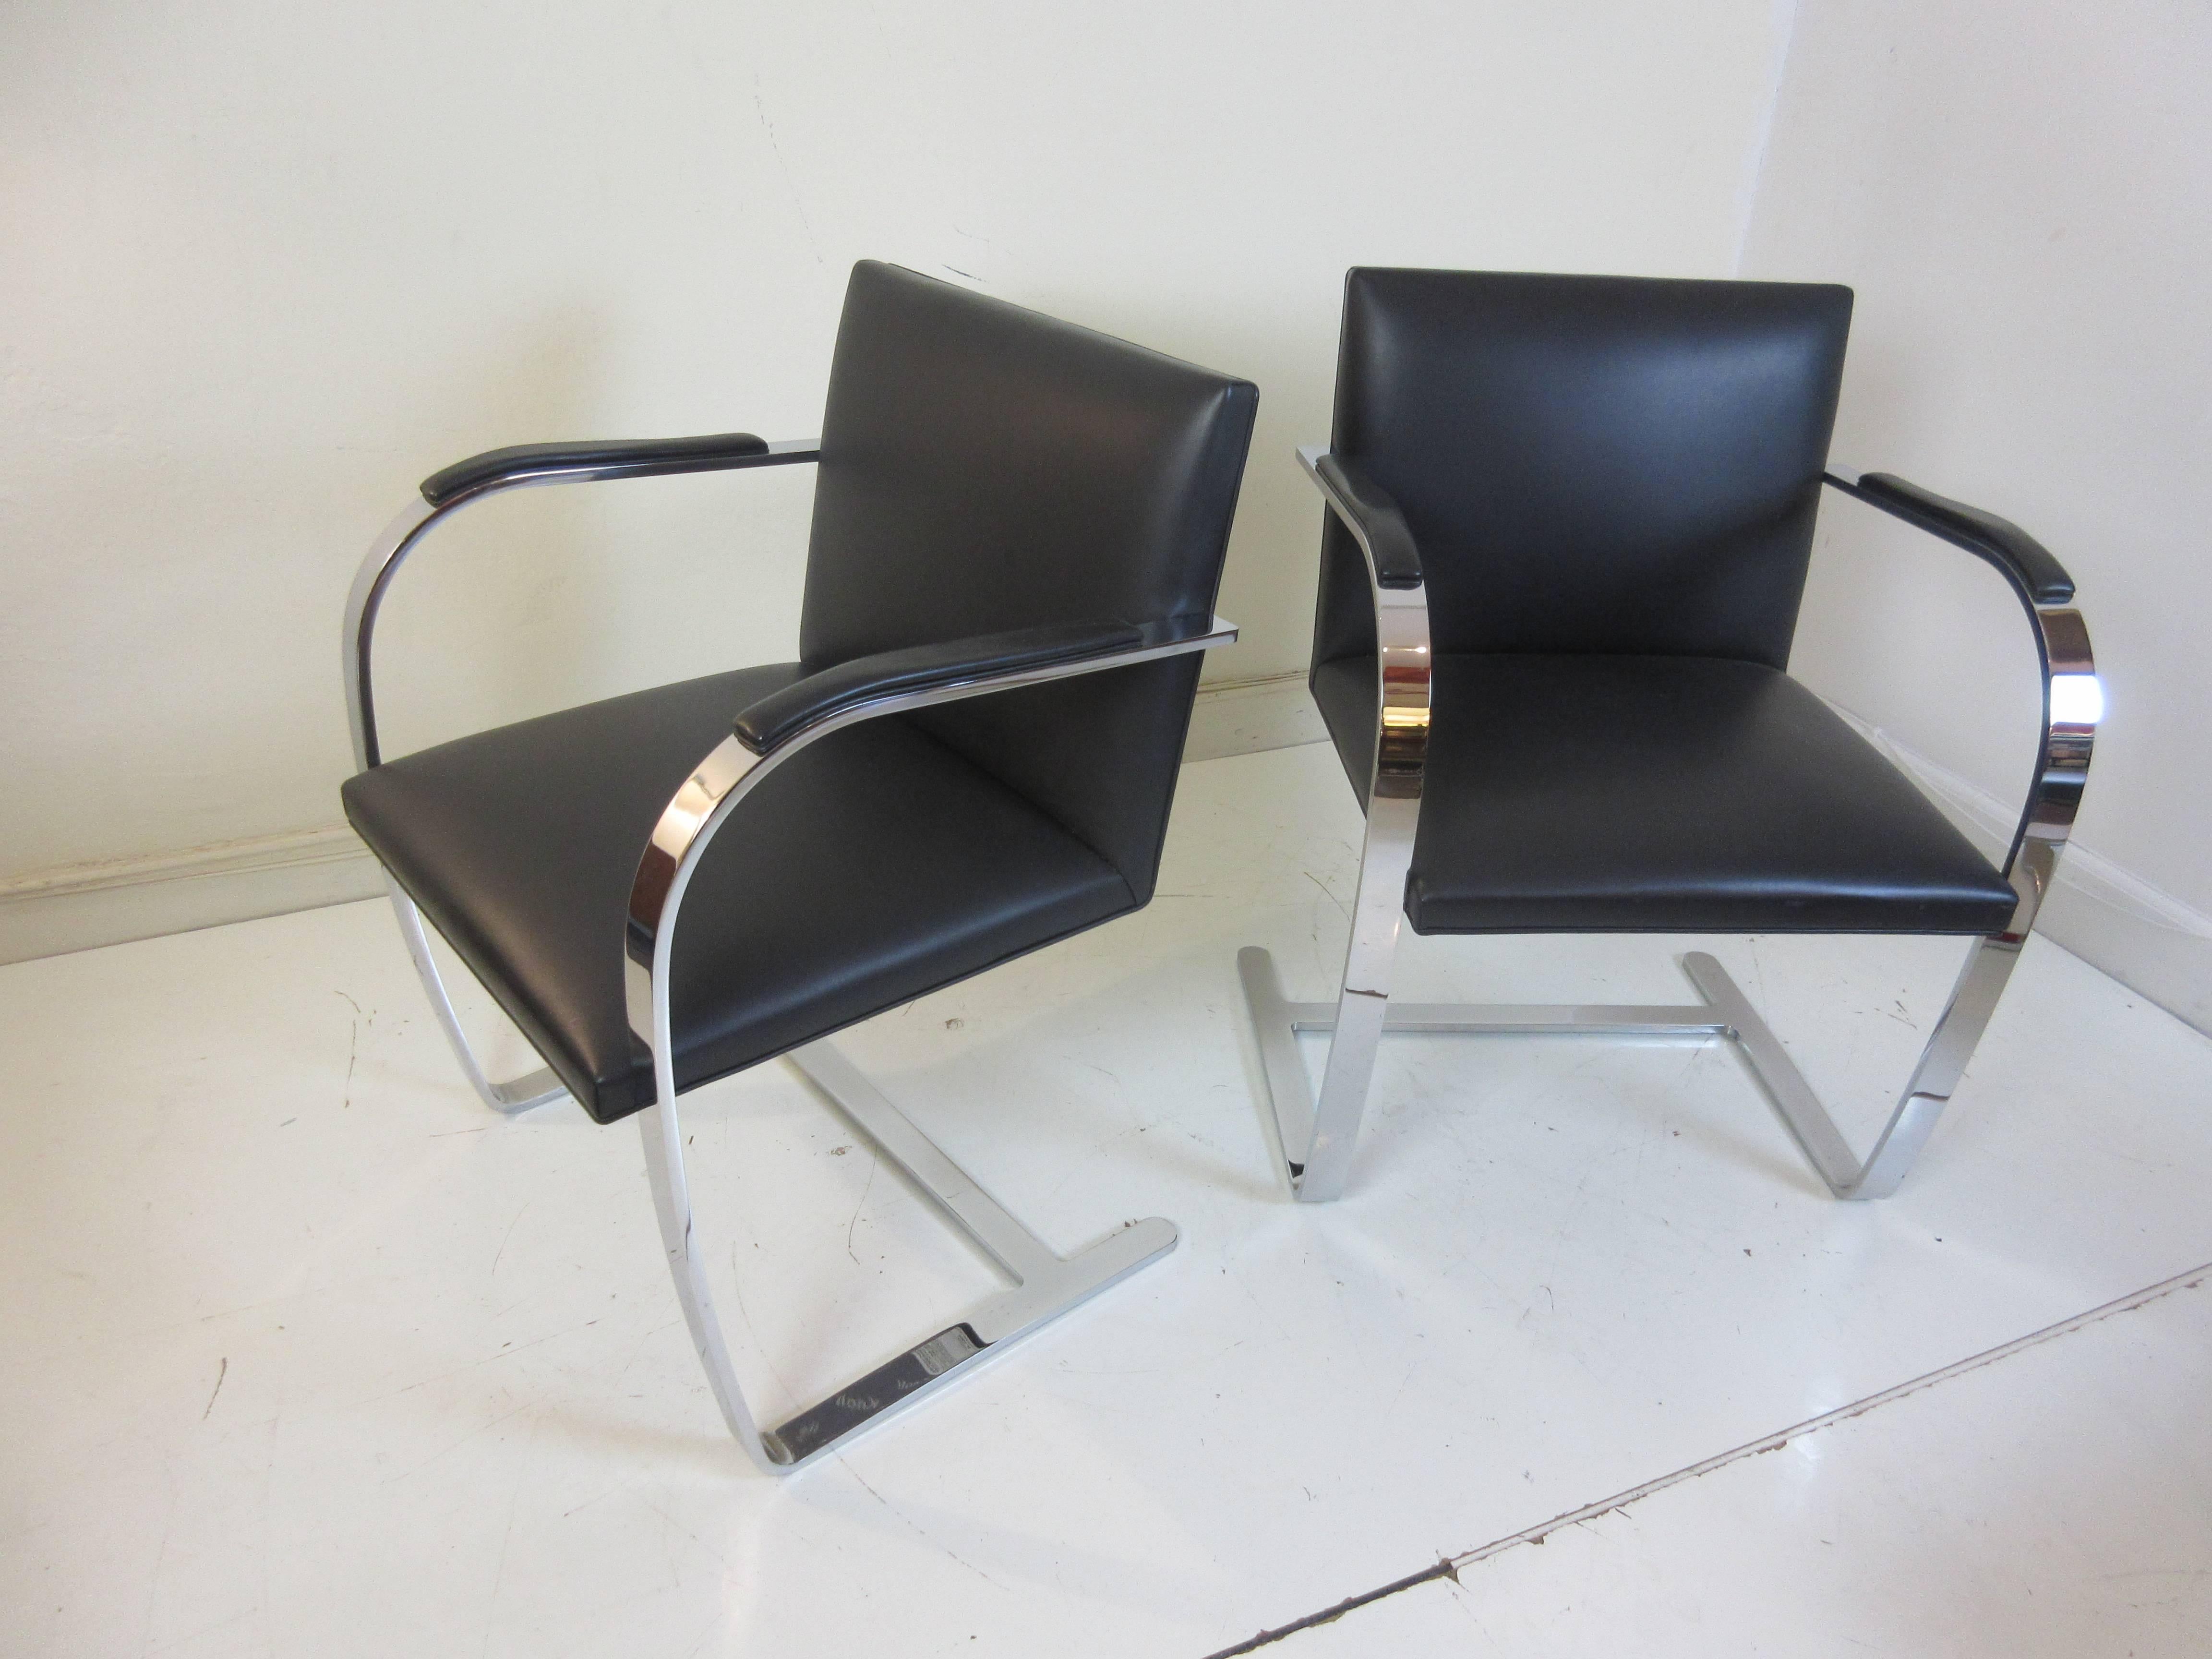 Mies van der Rohe for Knoll chair in leather with arm pads and flat banded triple plated chrome frames. Never used and perfect. Dated 2002 on Knoll production tags. Mies name etched in chrome.